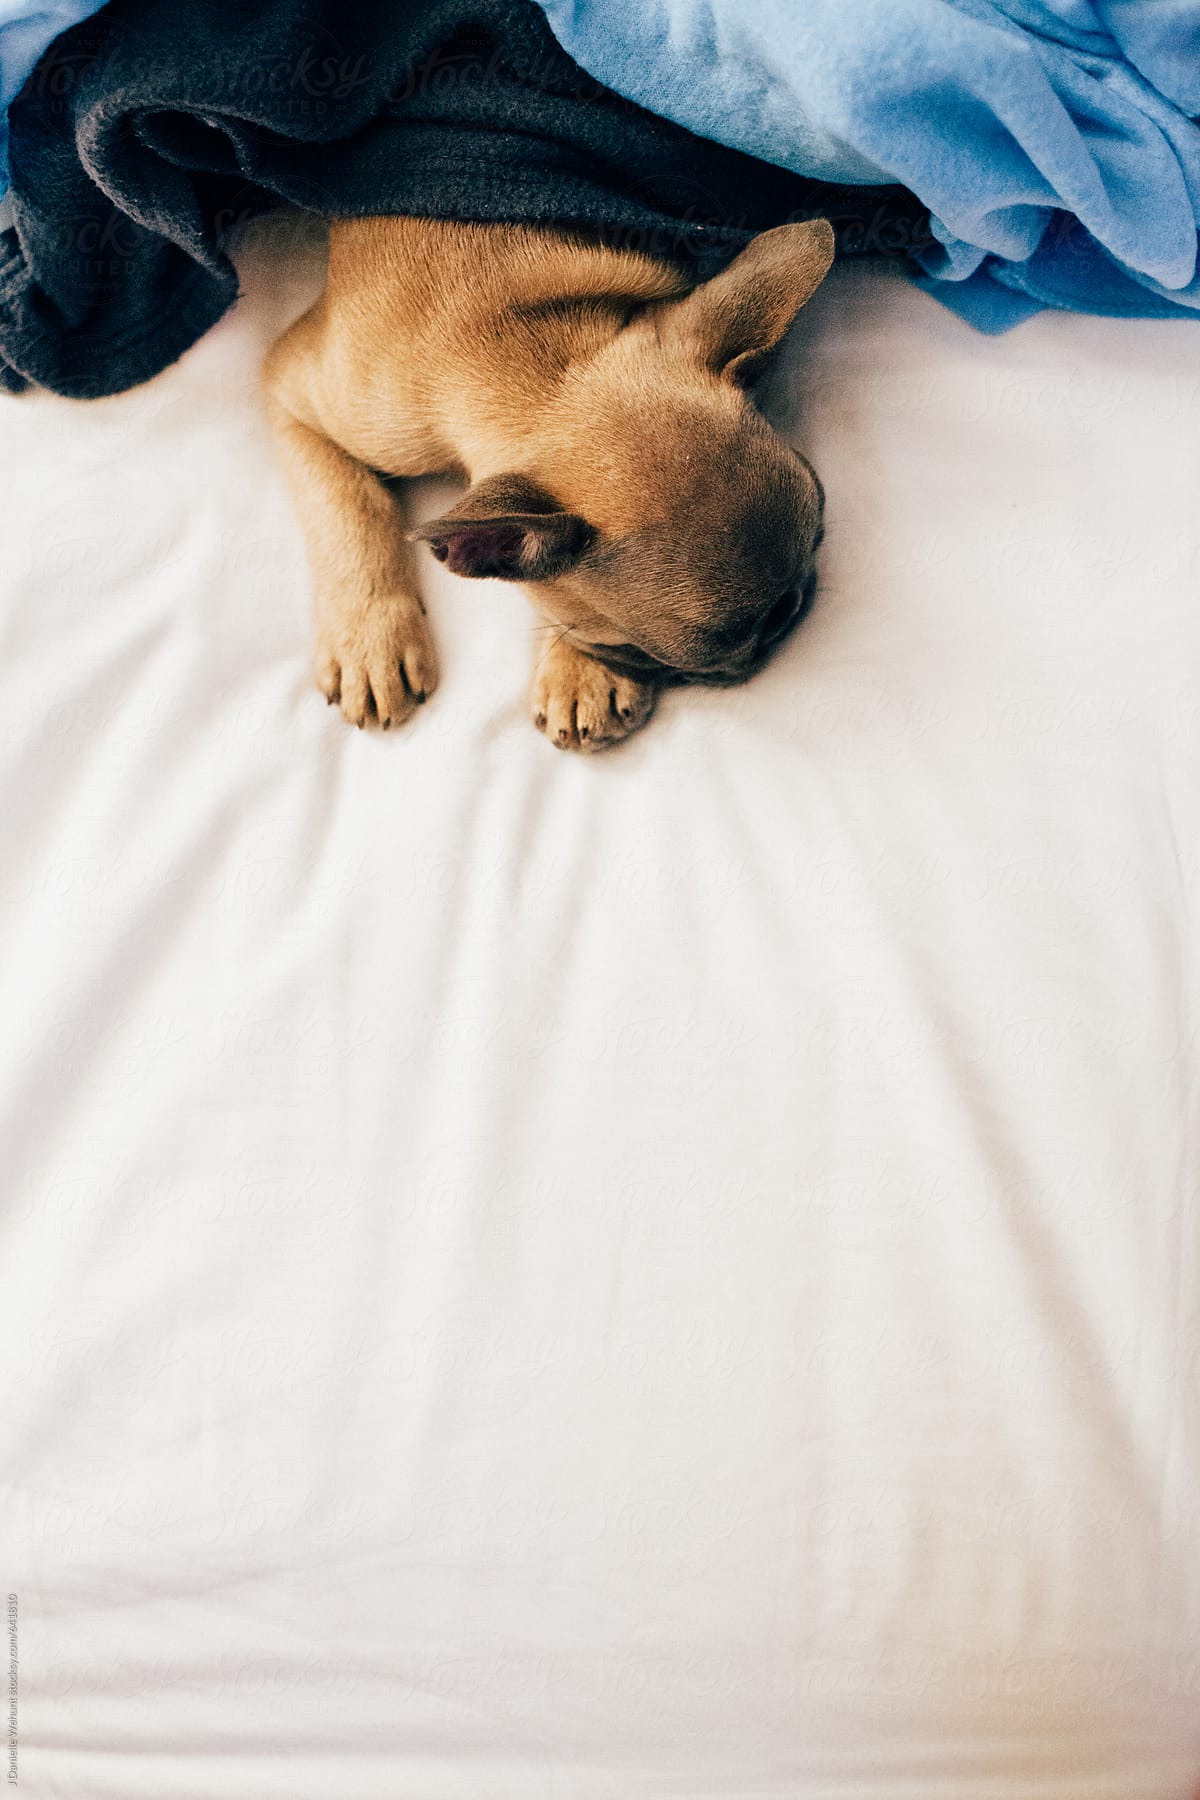 A french bulldog puppy sleeping with blankets in bed